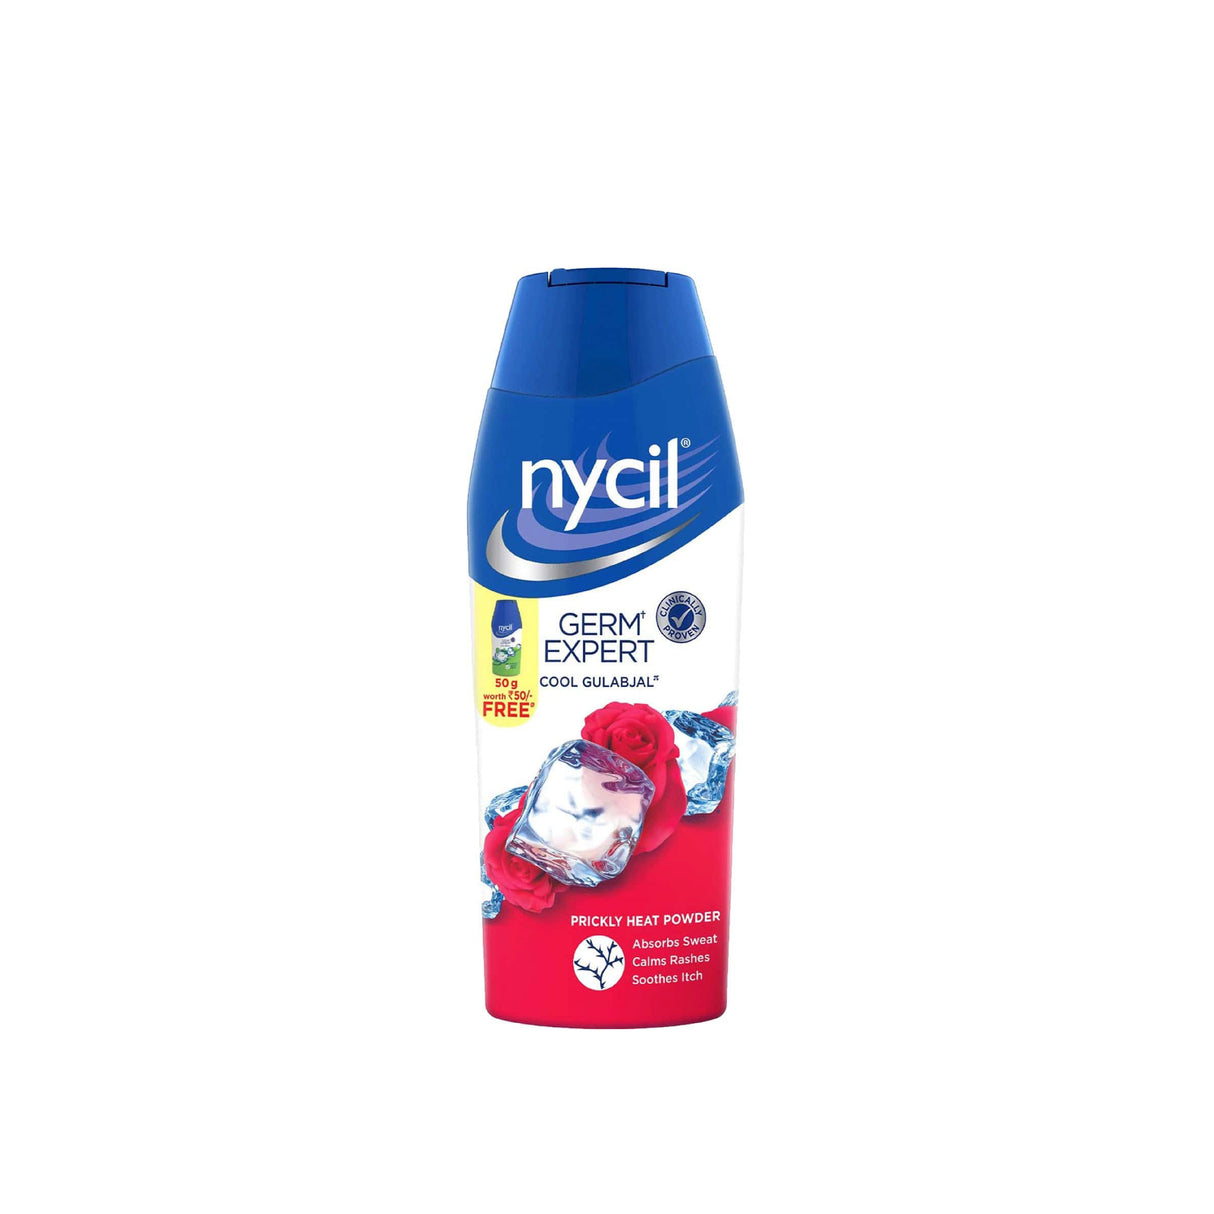 Nycil Cool Gulabjal Instant Cooling Prickly Heat Powder Talc with Rose Fragrance